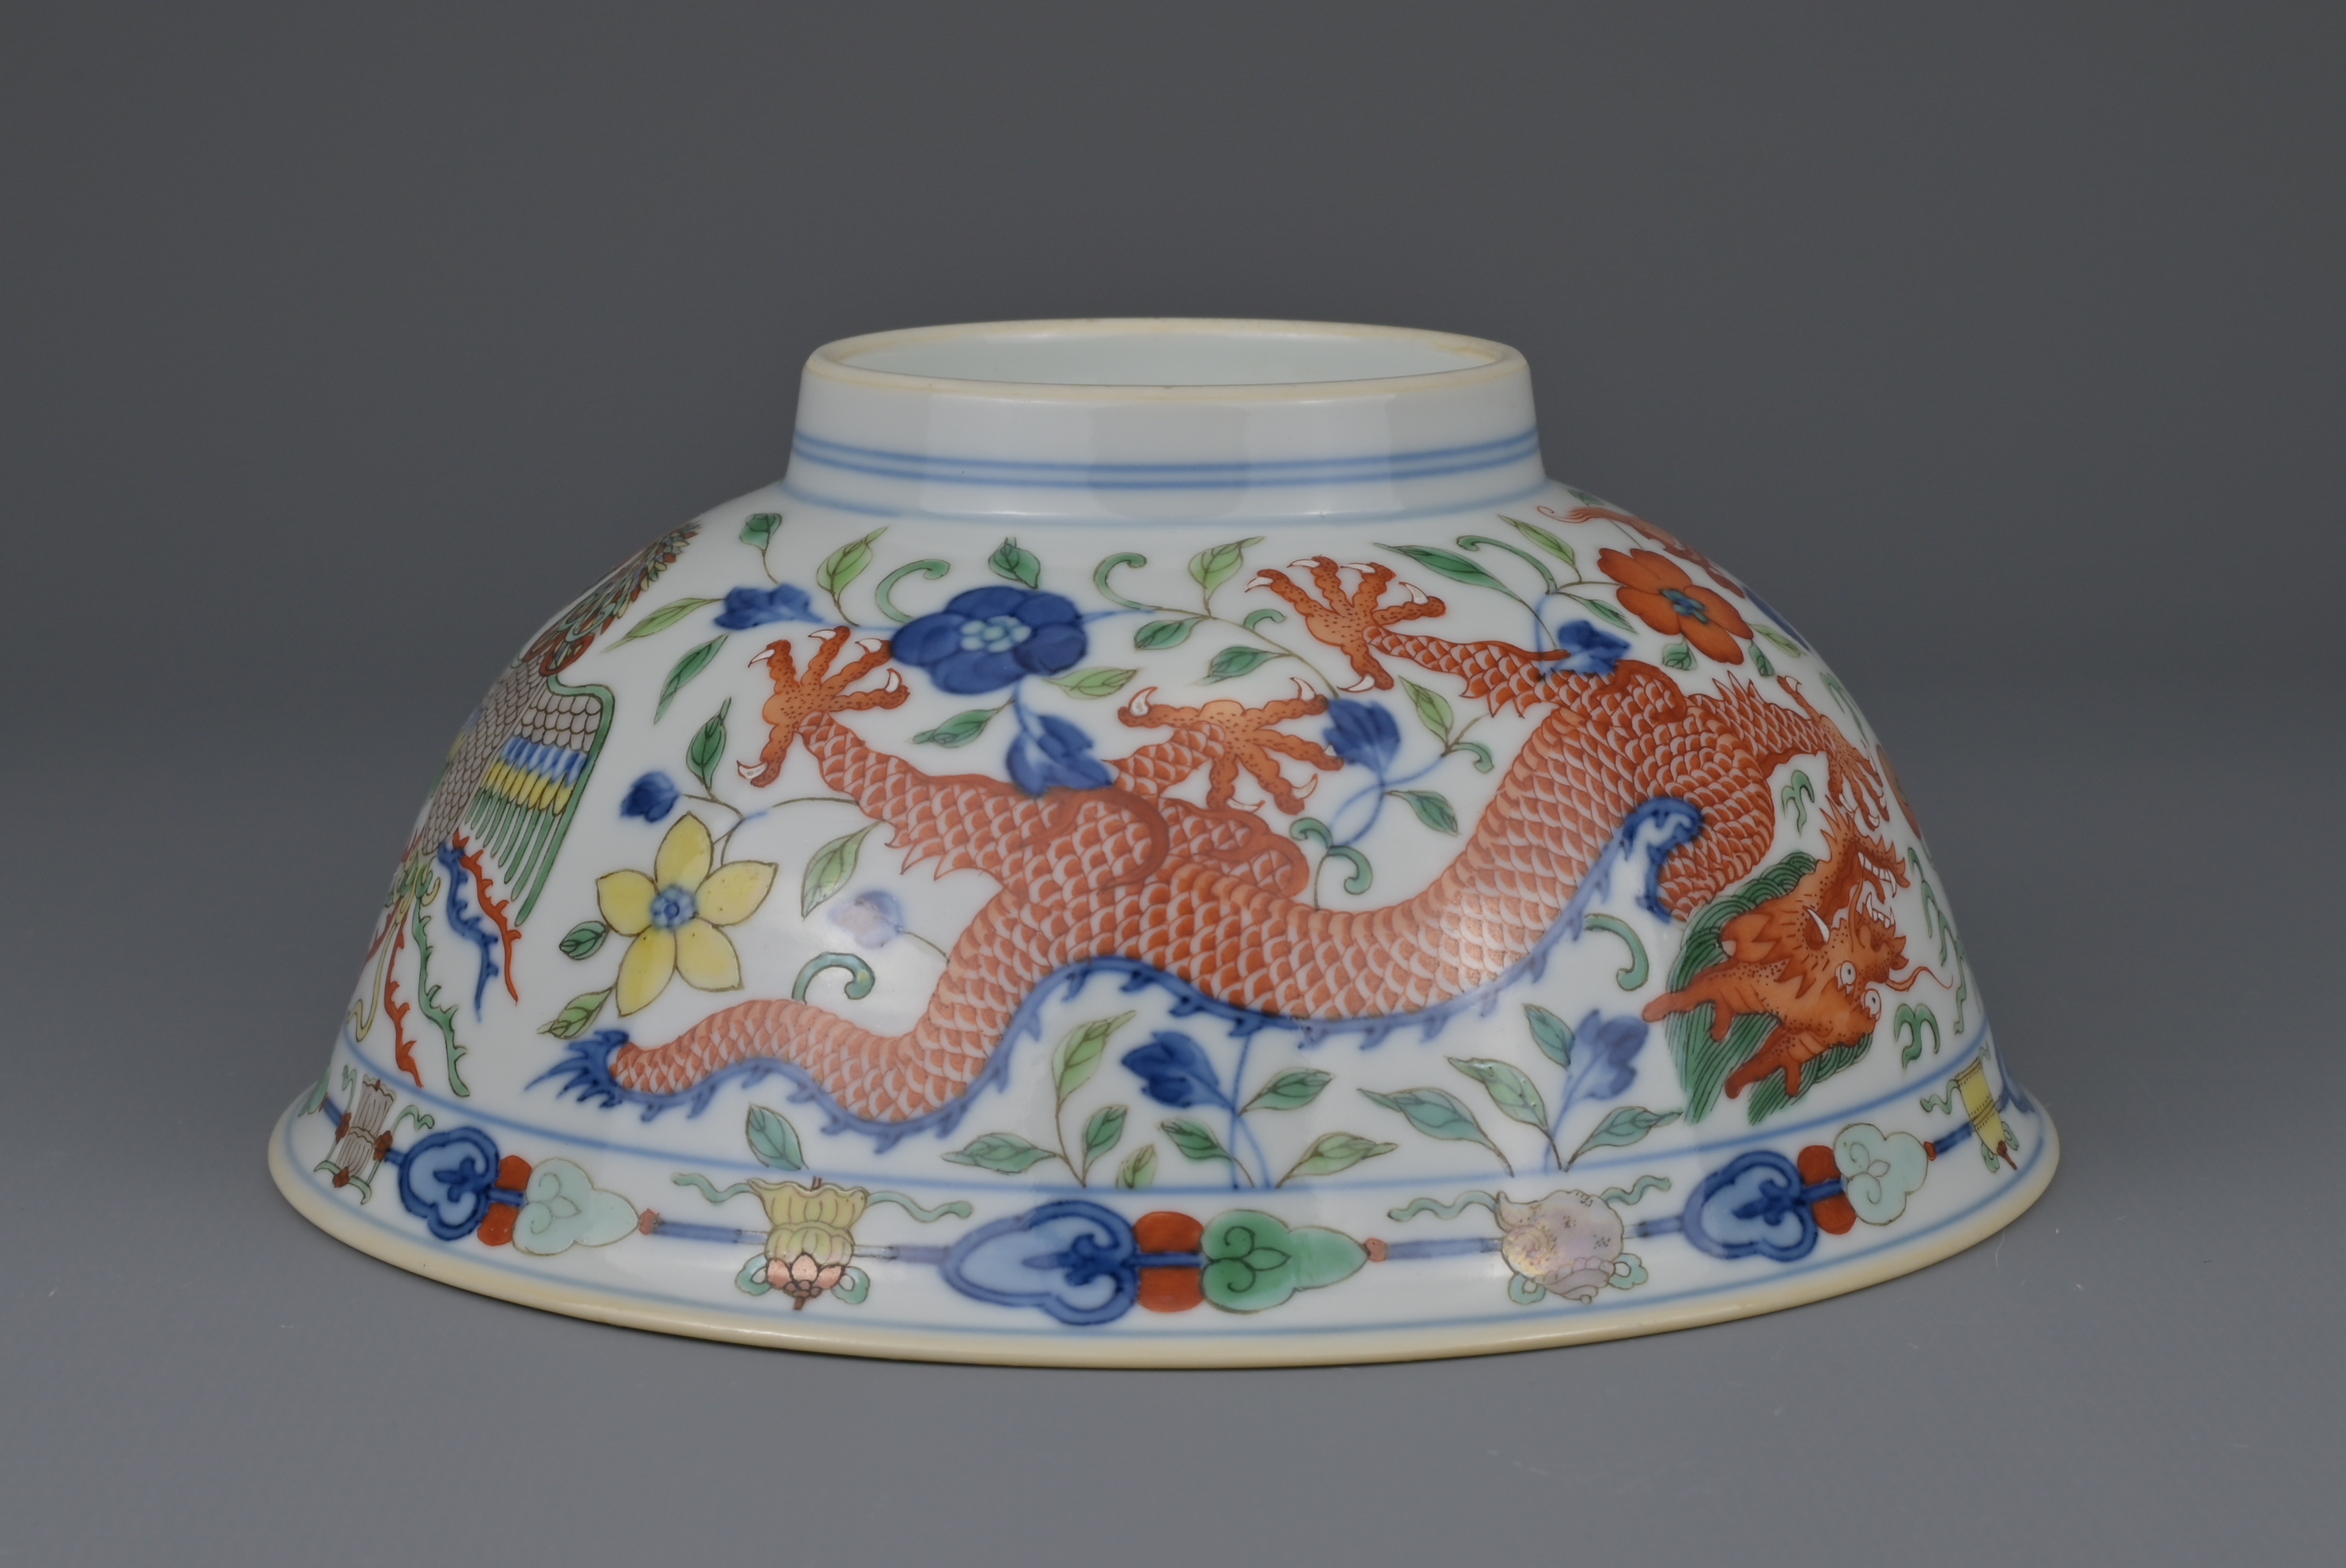 FINE CHINESE WUCAI ‘DRAGON & PHOENIX’ PORCELAIN BOWL, JIAQING MARK AND PERIOD, EARLY 19th CENTURY - Image 10 of 14